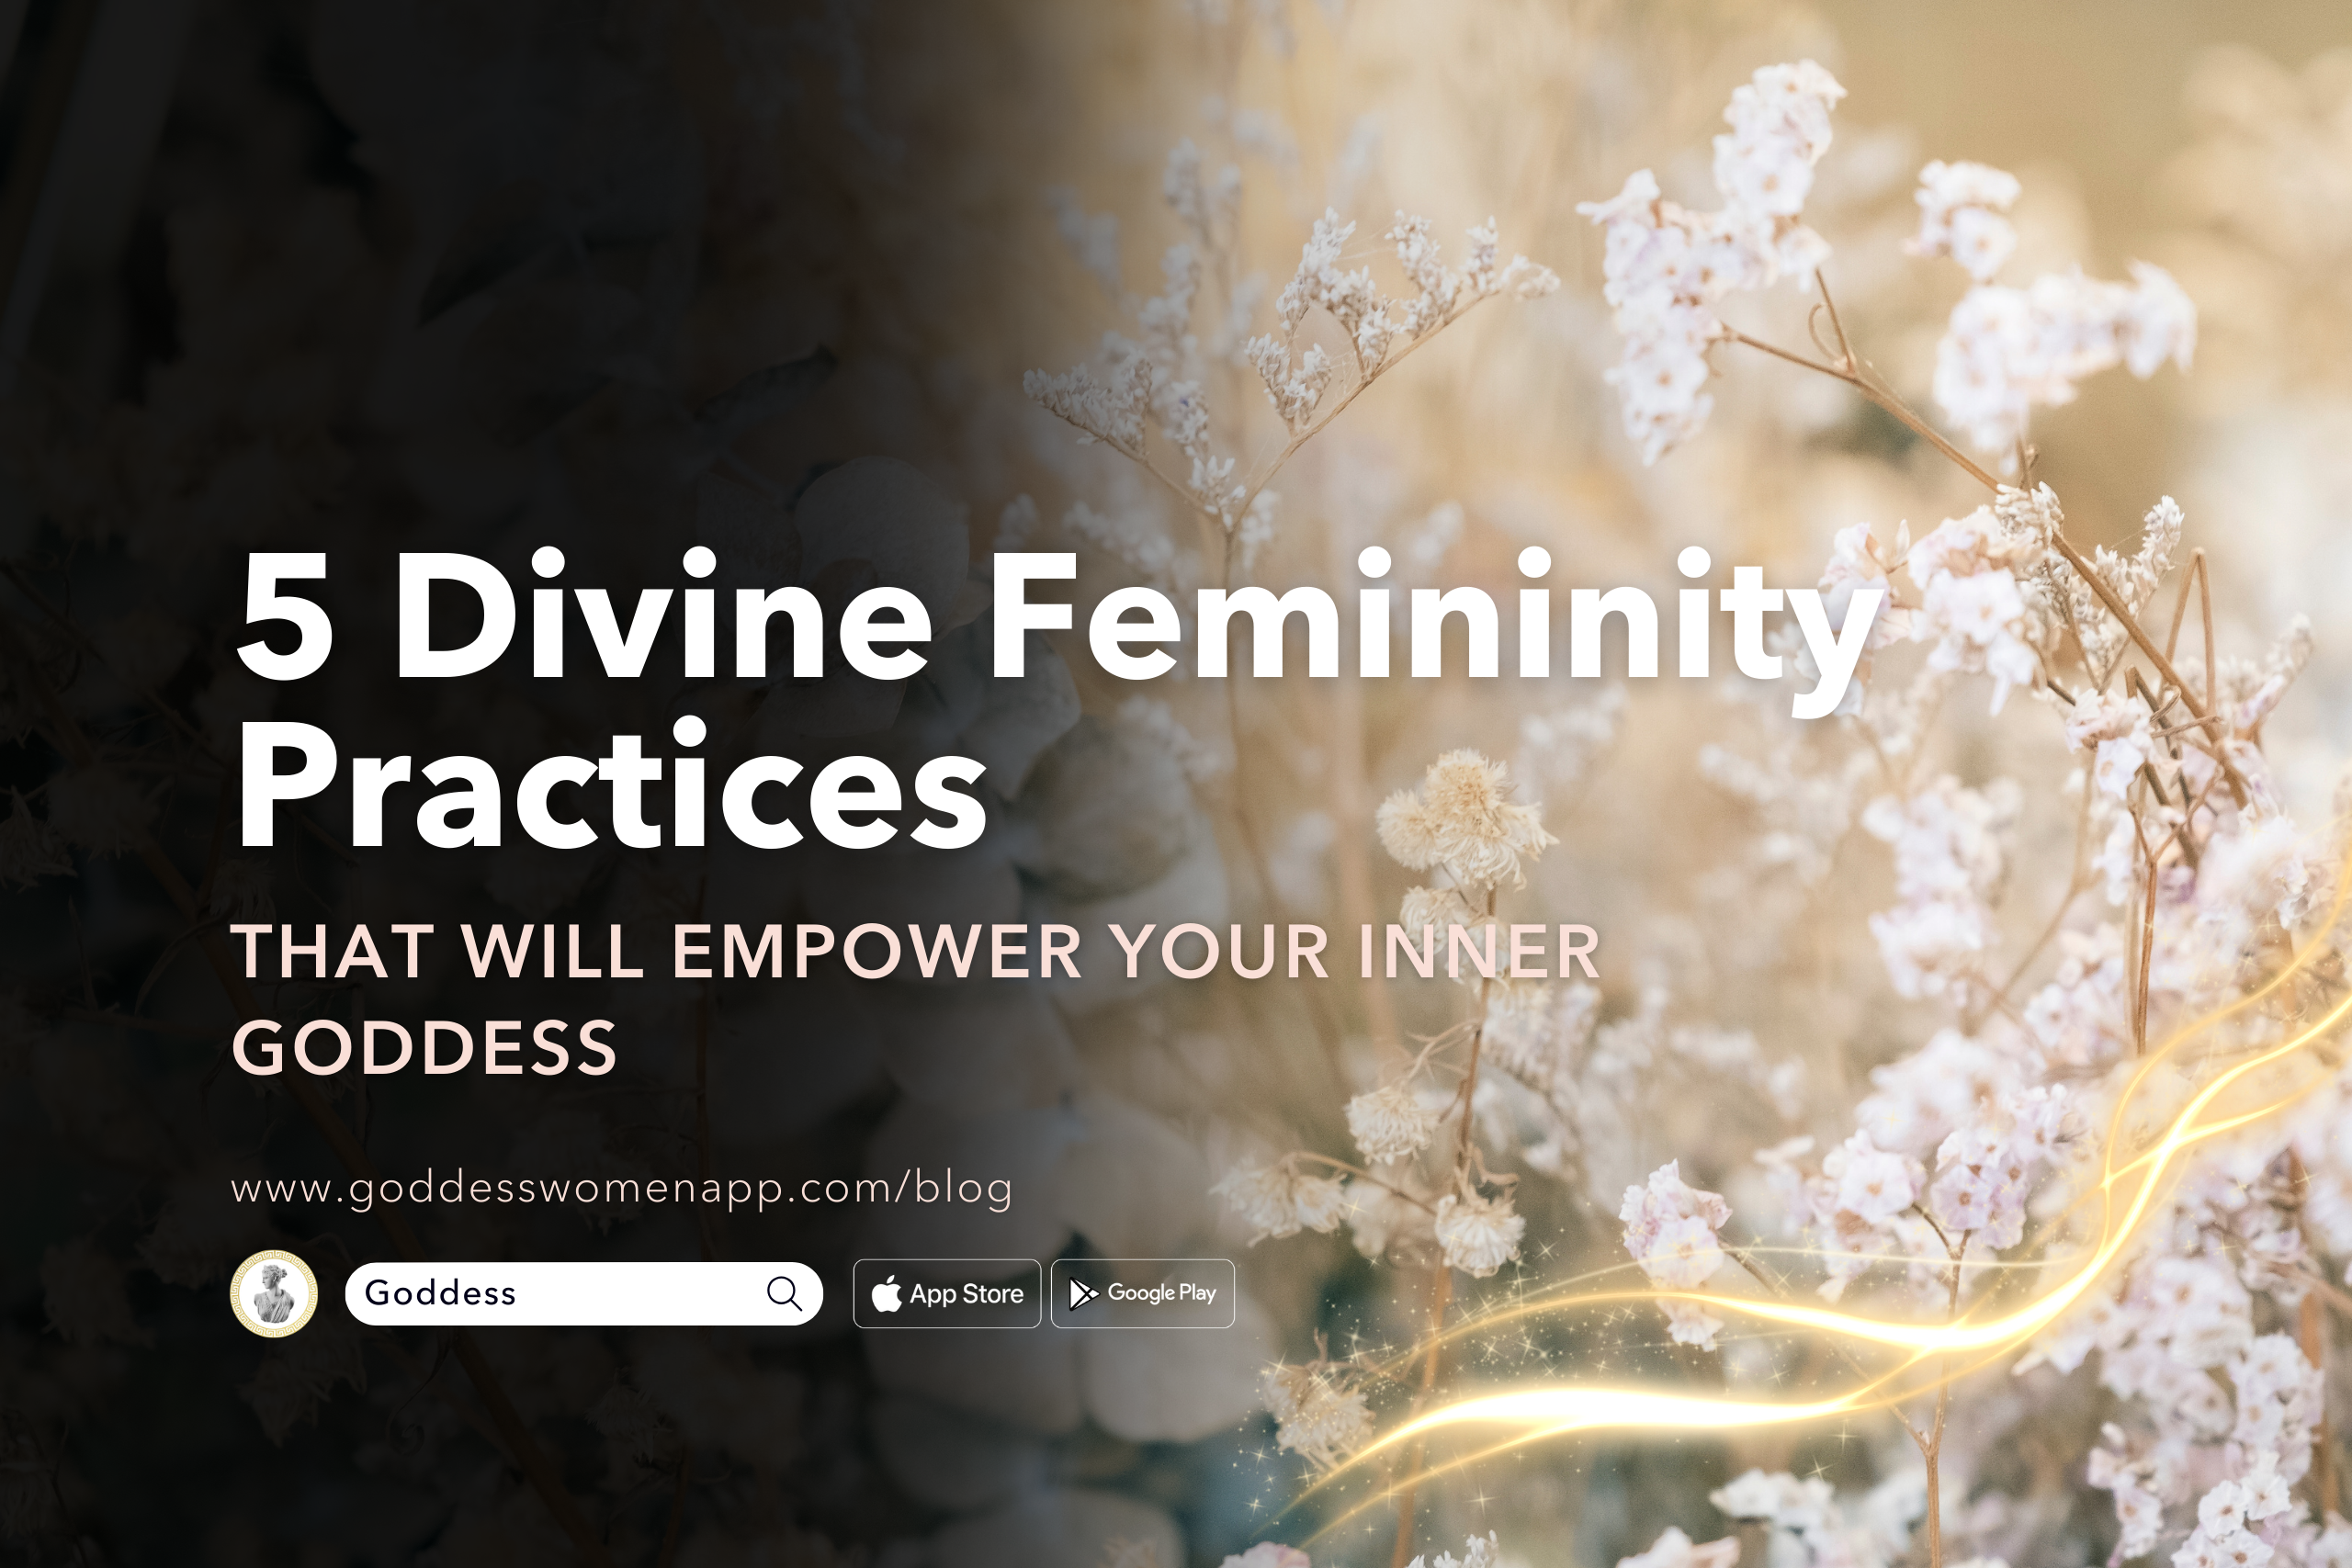 5 Divine Femininity Practices That Will Empower Your Inner Goddess